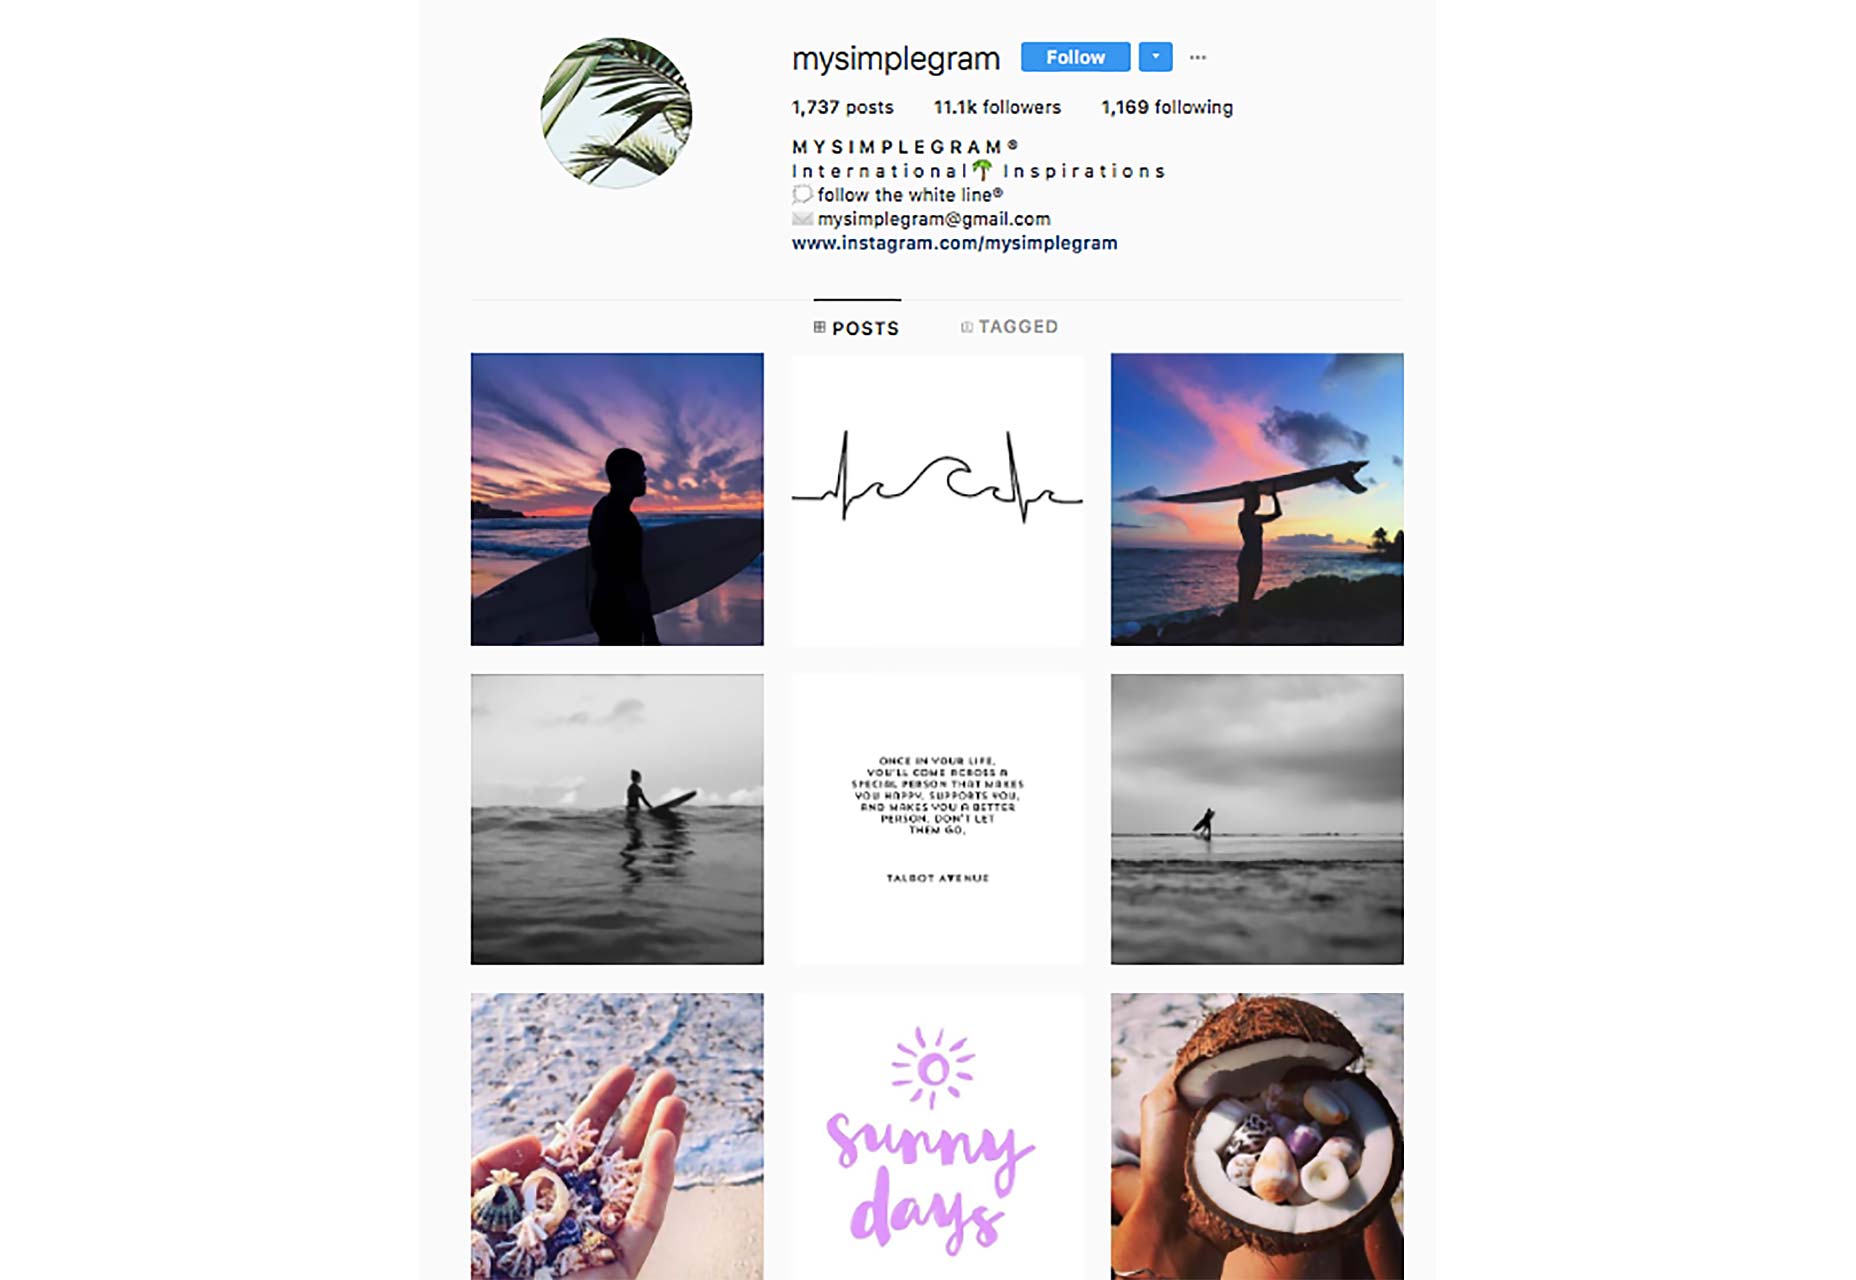 Create a Stunning and Irresistible Instagram Account